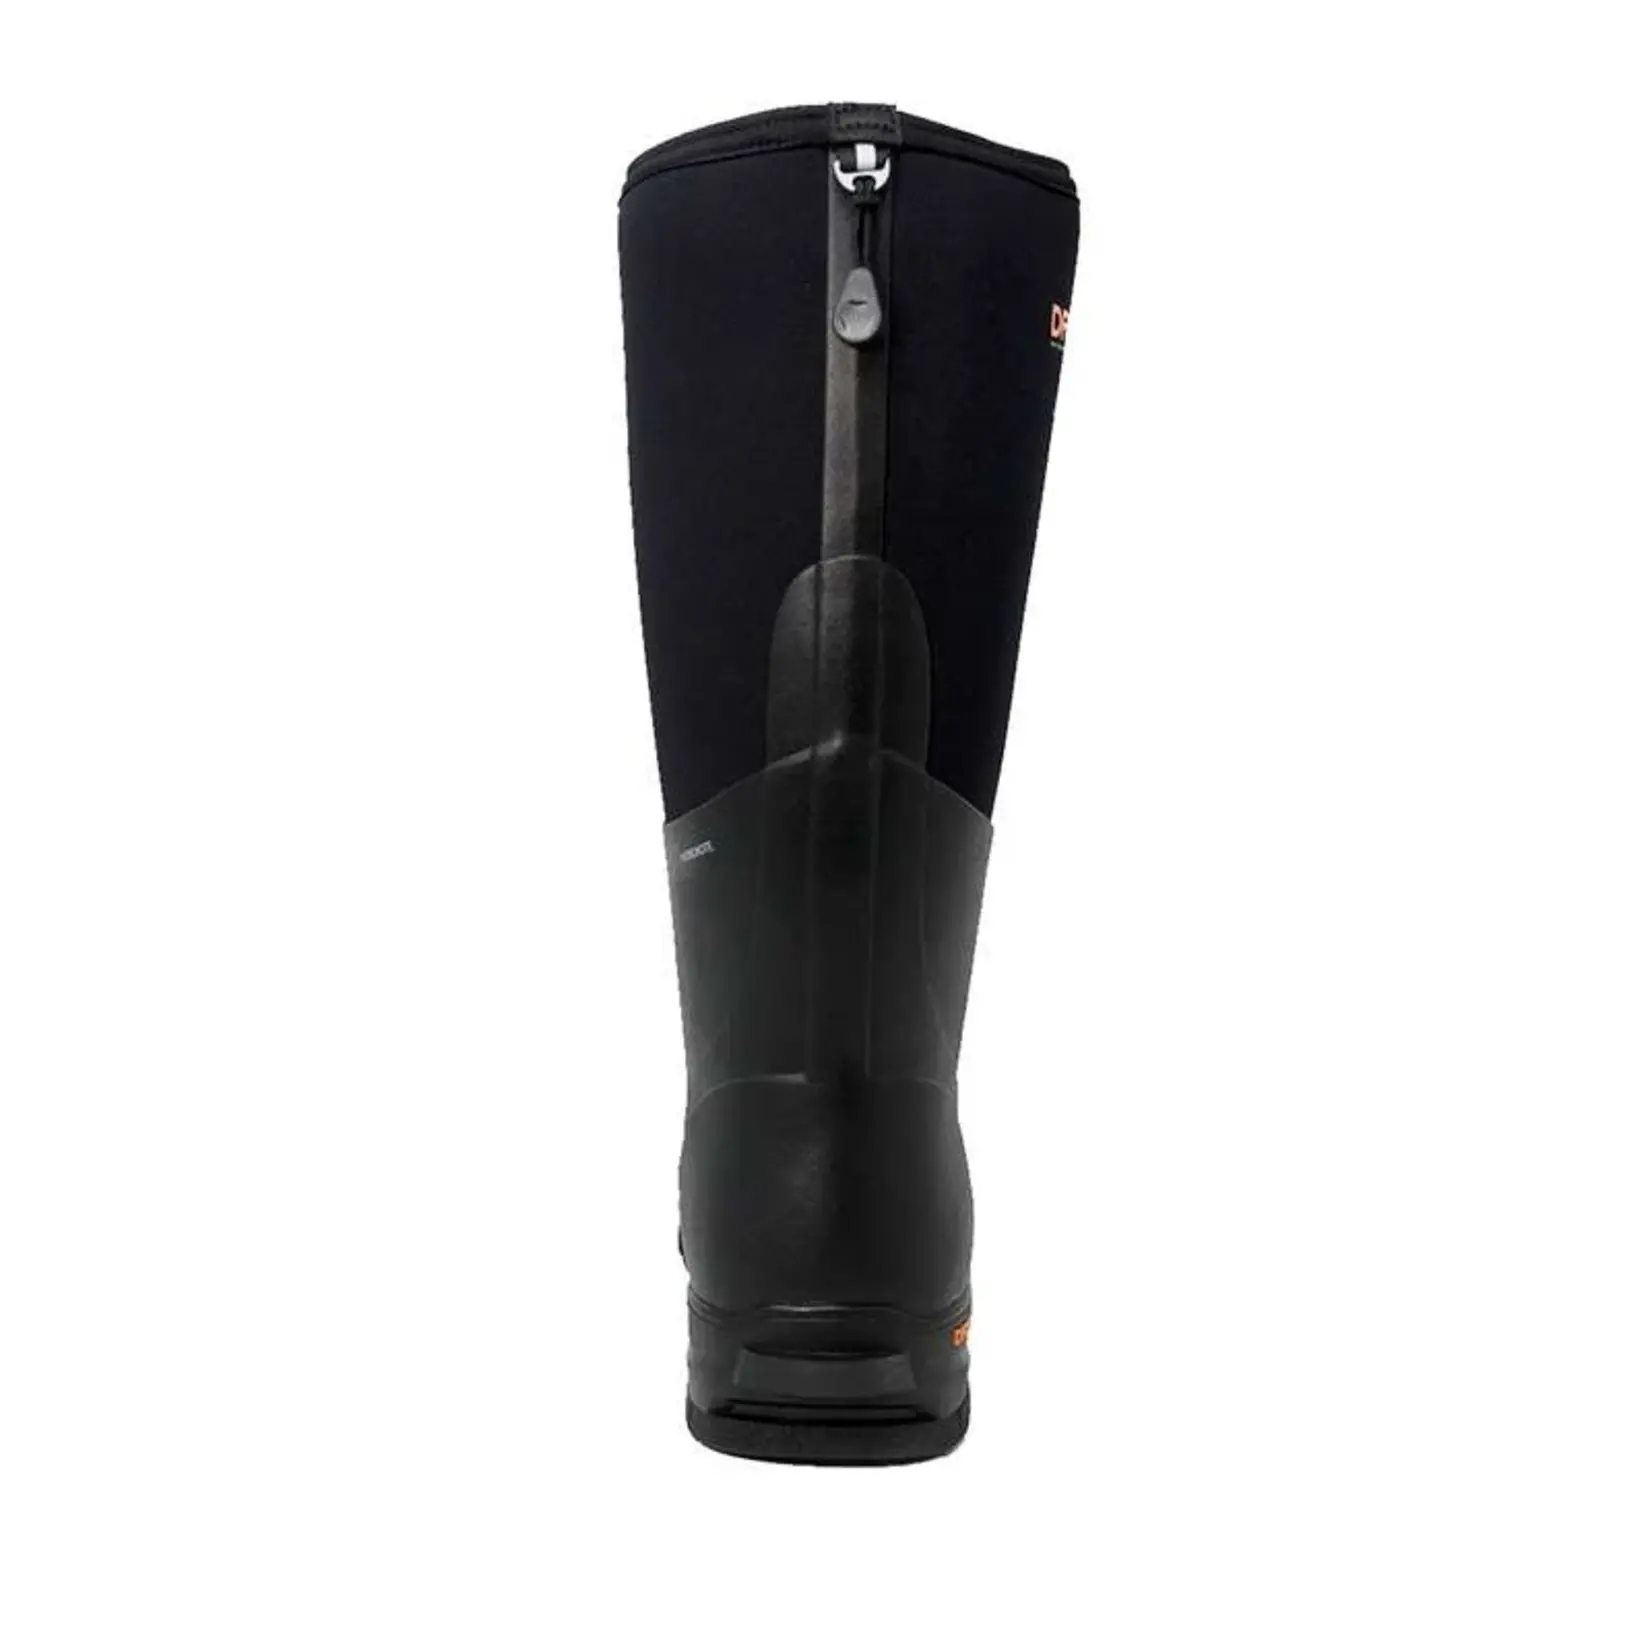 DRYSHOD Dry Shod Mudcat High Insulated Rubber Boot